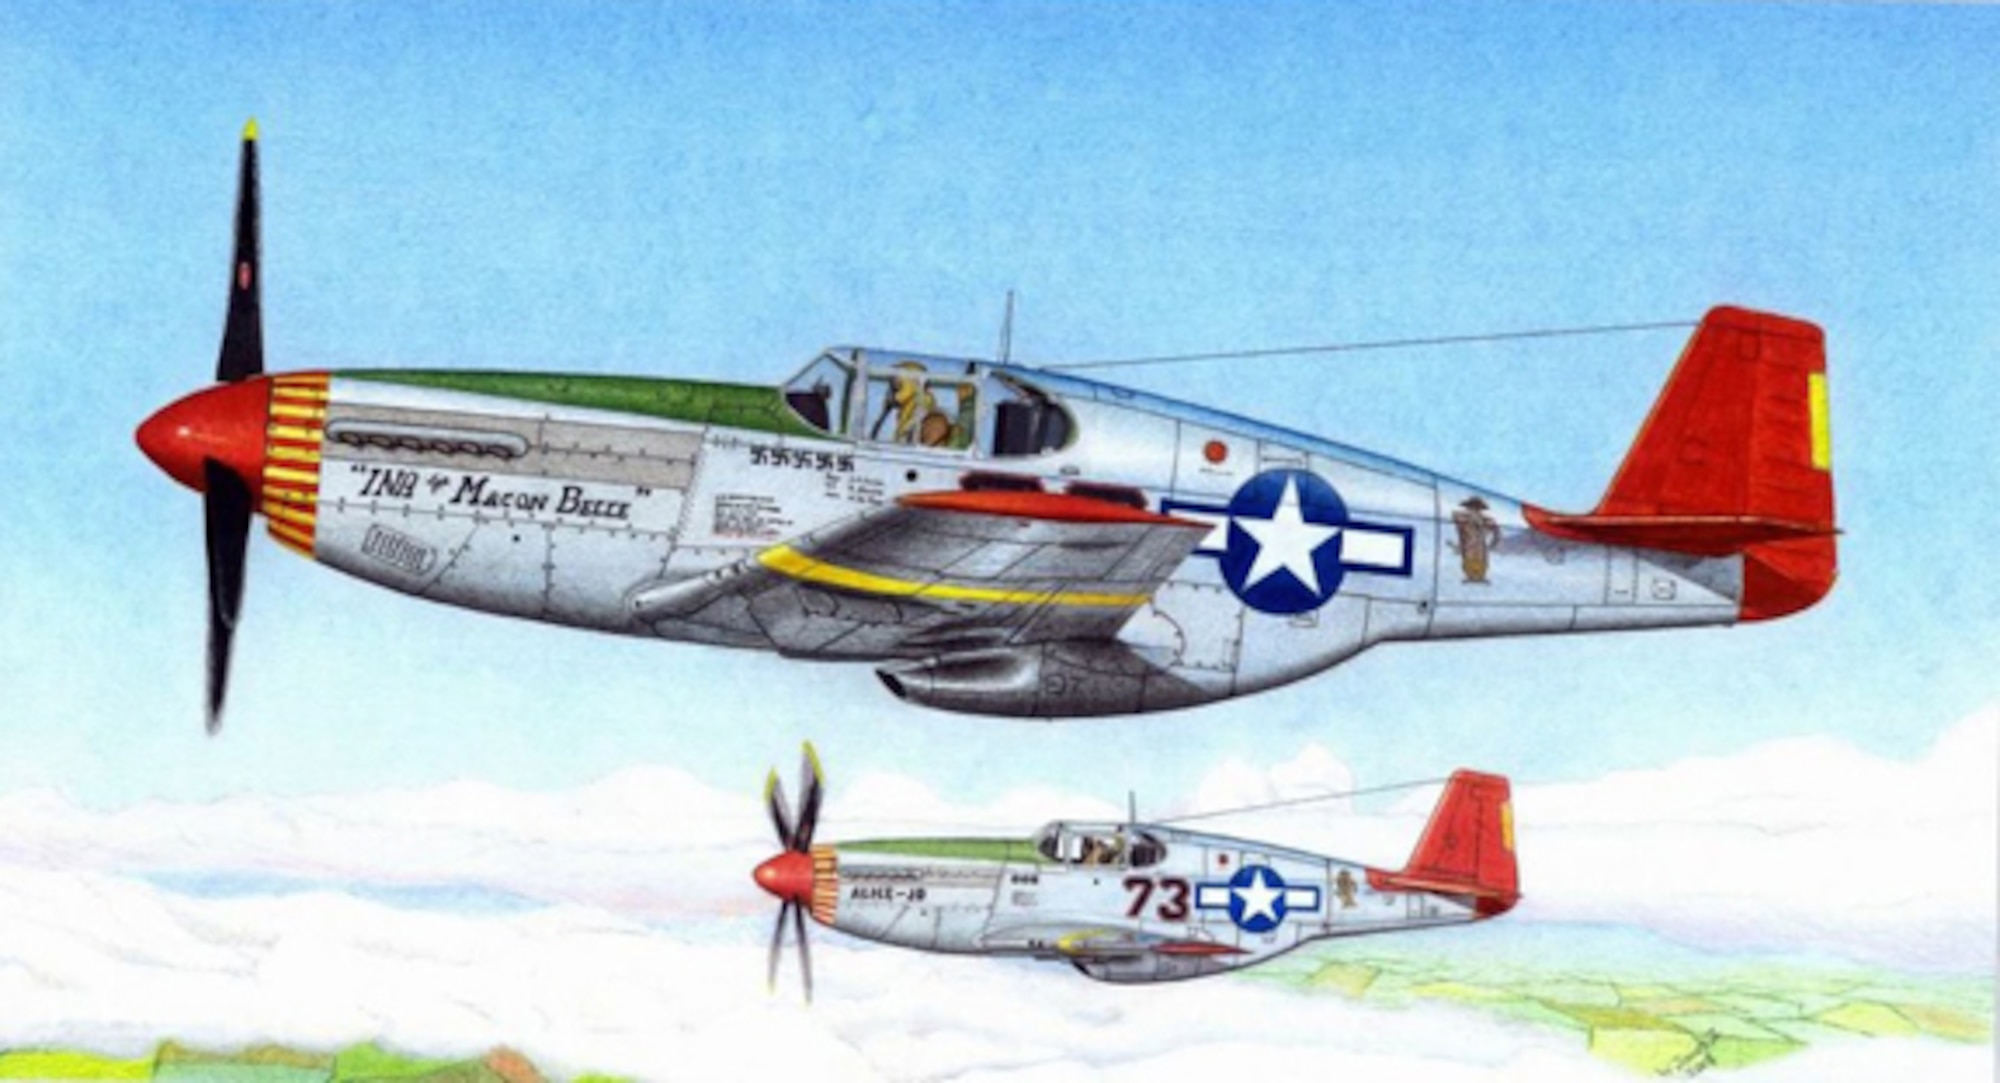 P-51C Mustang “Gruesome Twosome”   Art by Willie Jones. This image is copyrighted and is the property of Willie Jones Jr. and is available only to members of the Armed Forces and Military organizations.  Gruesome Twosome was often used to describe the 332ND Fighter Group’s most successful lead pilot - wingmen combination, 1Lt Lee A. Archer, “INA the Macon Belle”, and Capt Wendell O. Pruitt, “ALICE - JO”.  1Lt Archer and Capt Pruitt each accounted for 11 air and ground enemy kills with five and three air victories respectively.  1Lt Archer is the only documented “Ace” of the Tuskegee Airmen.  He was originally listed with five kills although official Air Force records indicate four air-to-air kills.  His victory credits were re-accessed and one claim was disallowed and listed as a probable.  This process removed him from the list of American Aces.  Many aerial victory lists credit him with 4, 4.5, or 5 victories.  1Lt Archer and Capt Pruitt were flamboyant and headstrong men who worked well together.  Both being from big cities, were considered “Hip Cats”.  1Lt Archer was from New York City and Capt Pruitt was from St Louis.  They liked the term and had a Zoot Suit clad “Hip Cat” painted on their “Red Tailed” P-51C Mustangs.  1Lt Lee A. Archer continued his military career and retired as a Lt Colonel but Capt Pruitt was not as fortunate.  Capt Wendell O. Pruitt was killed in a flying accident at Tuskegee Army Air Field after returning from a combat tour in Italy.  He was training a new cadet when the accident occurred.  It was speculated that the young cadet froze during a maneuver and the aircraft went down before Capt Pruitt could regain control.
